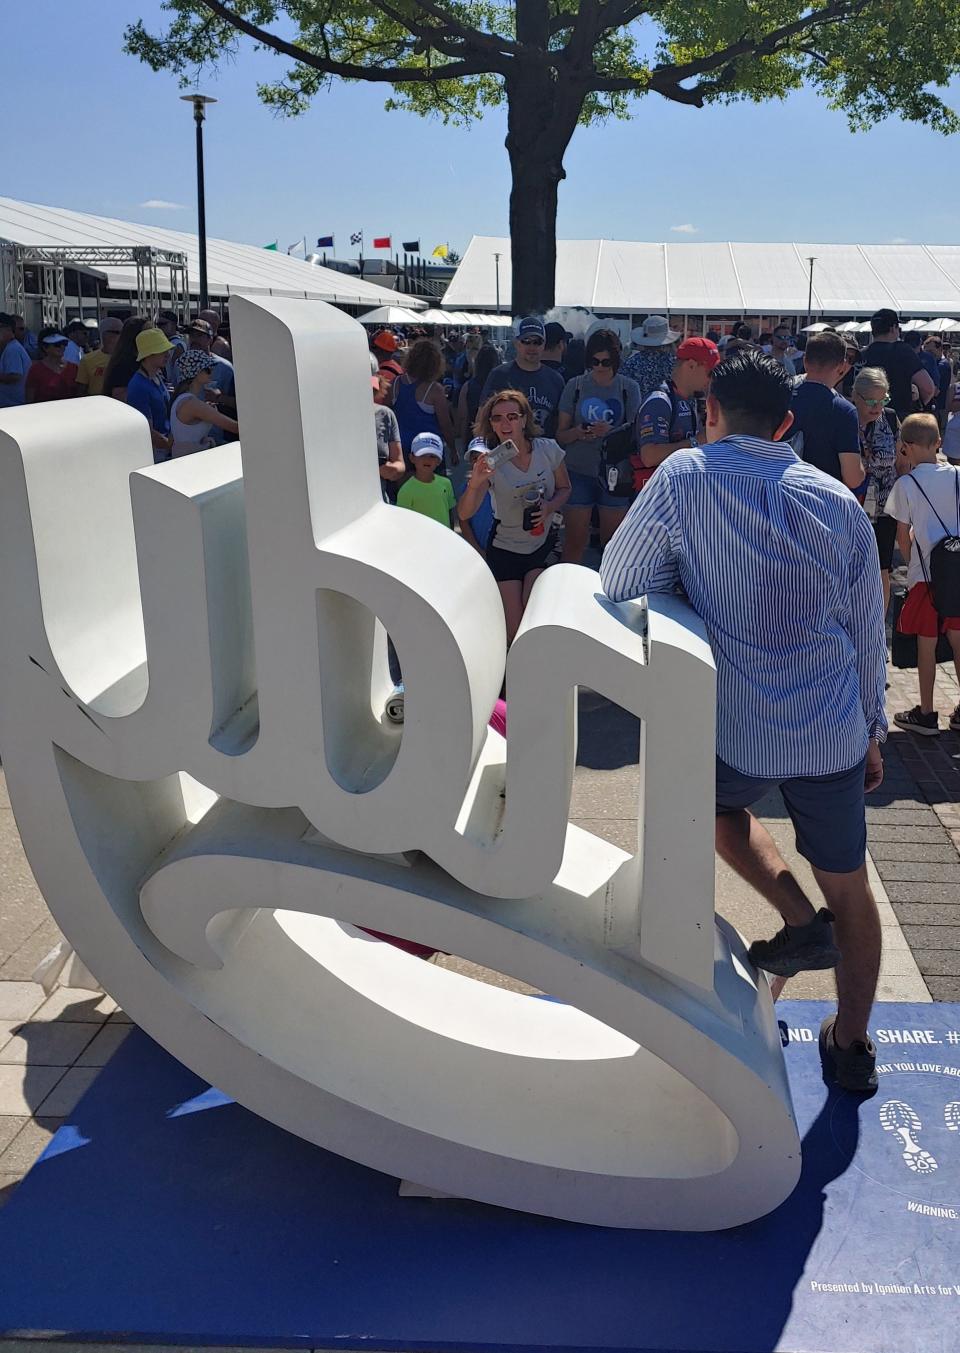 The "Indy" sign in the Speedway's infield fan zone is a popular location for a photo-op.